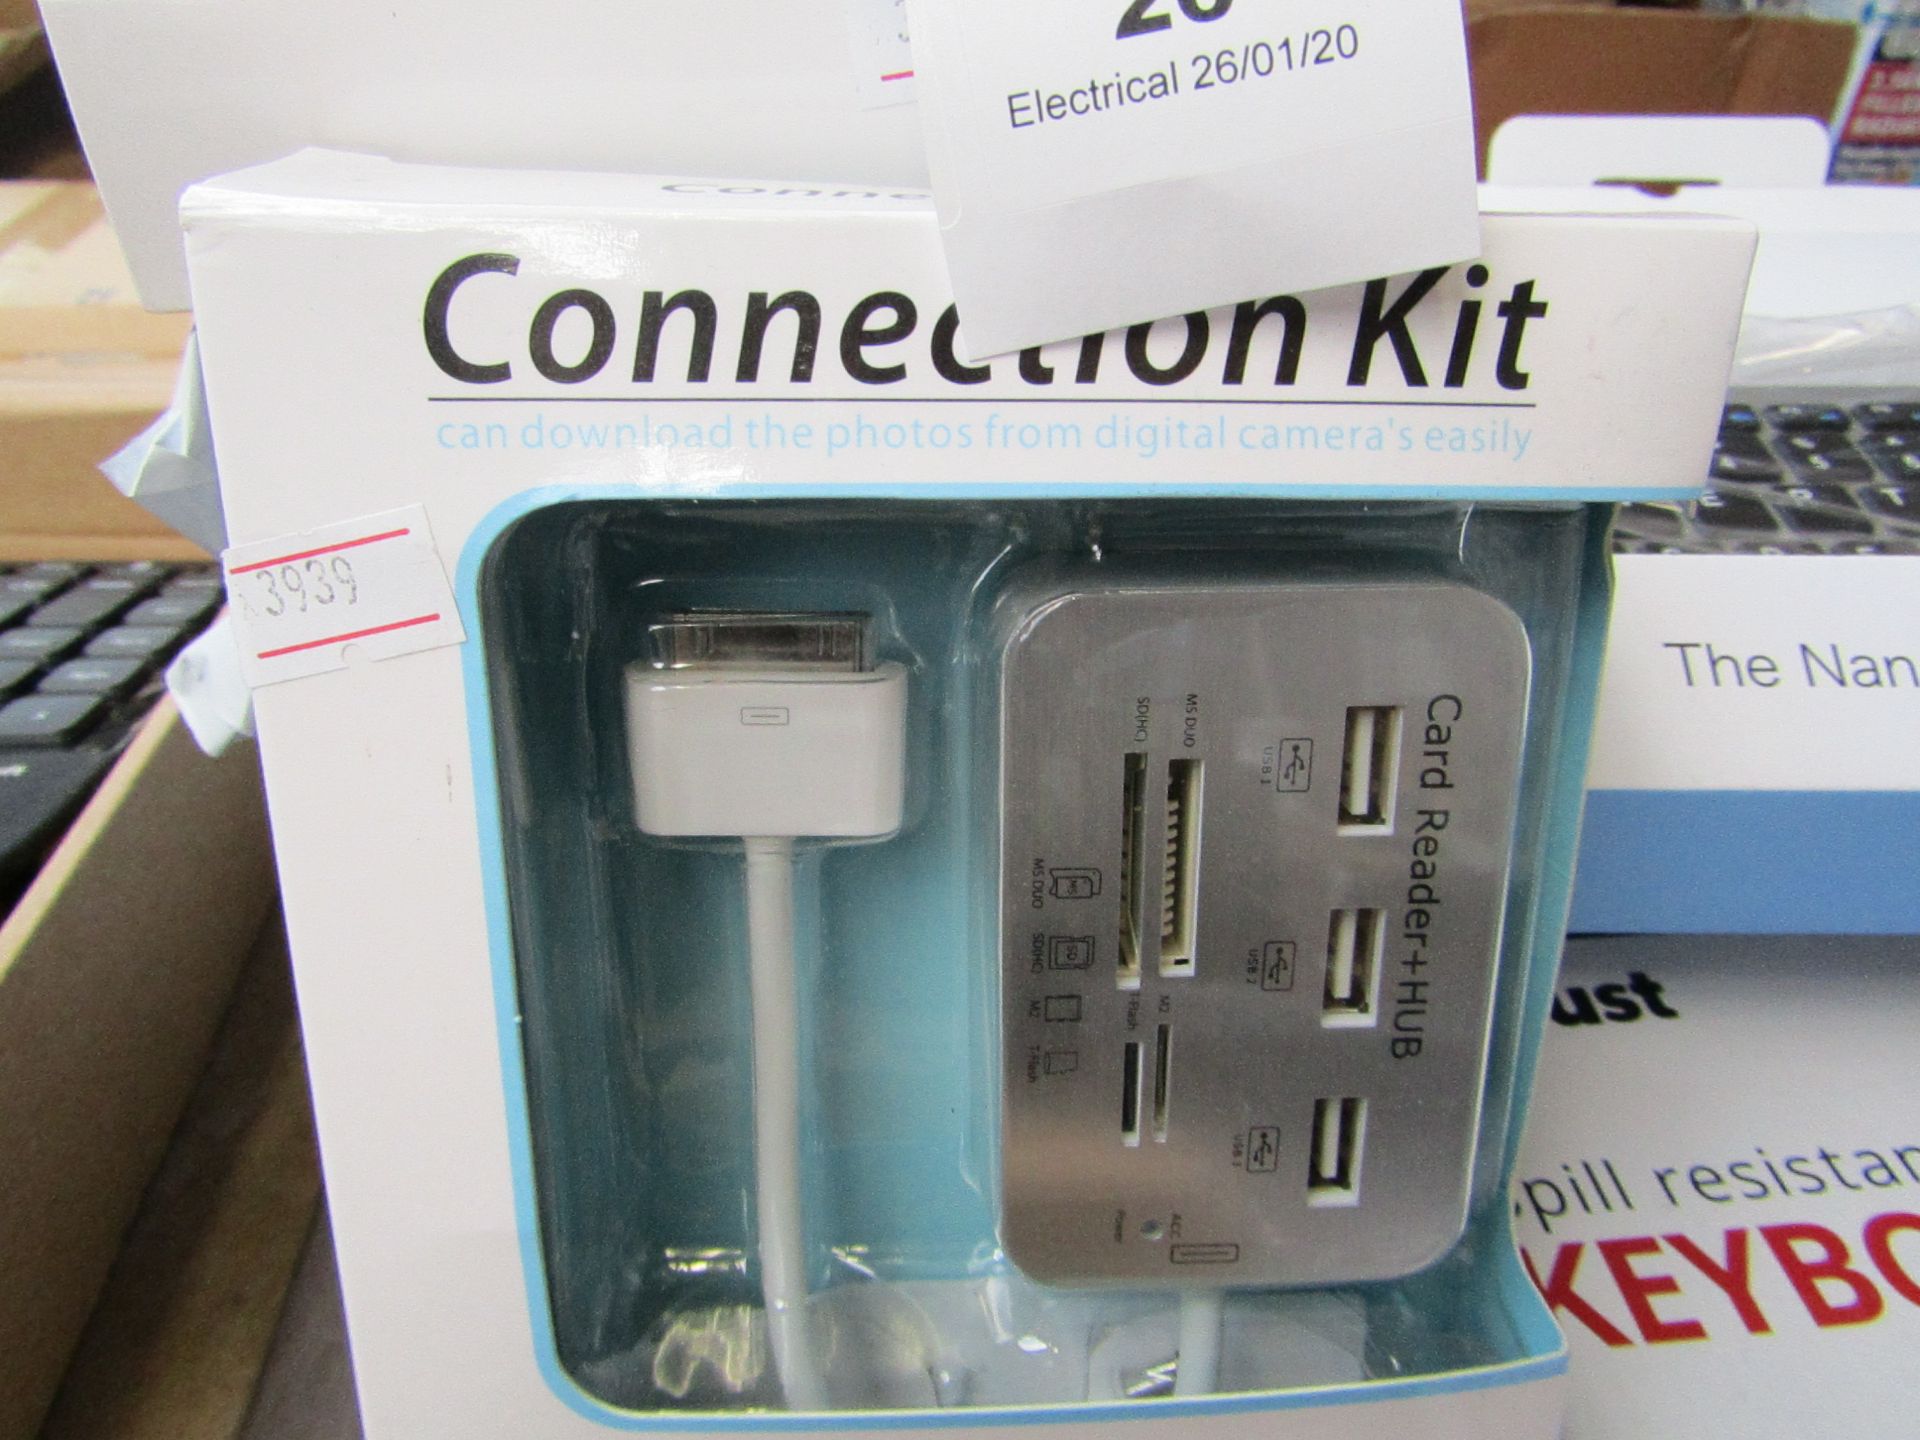 Connection kit - Card reader + Hub - Packaged.